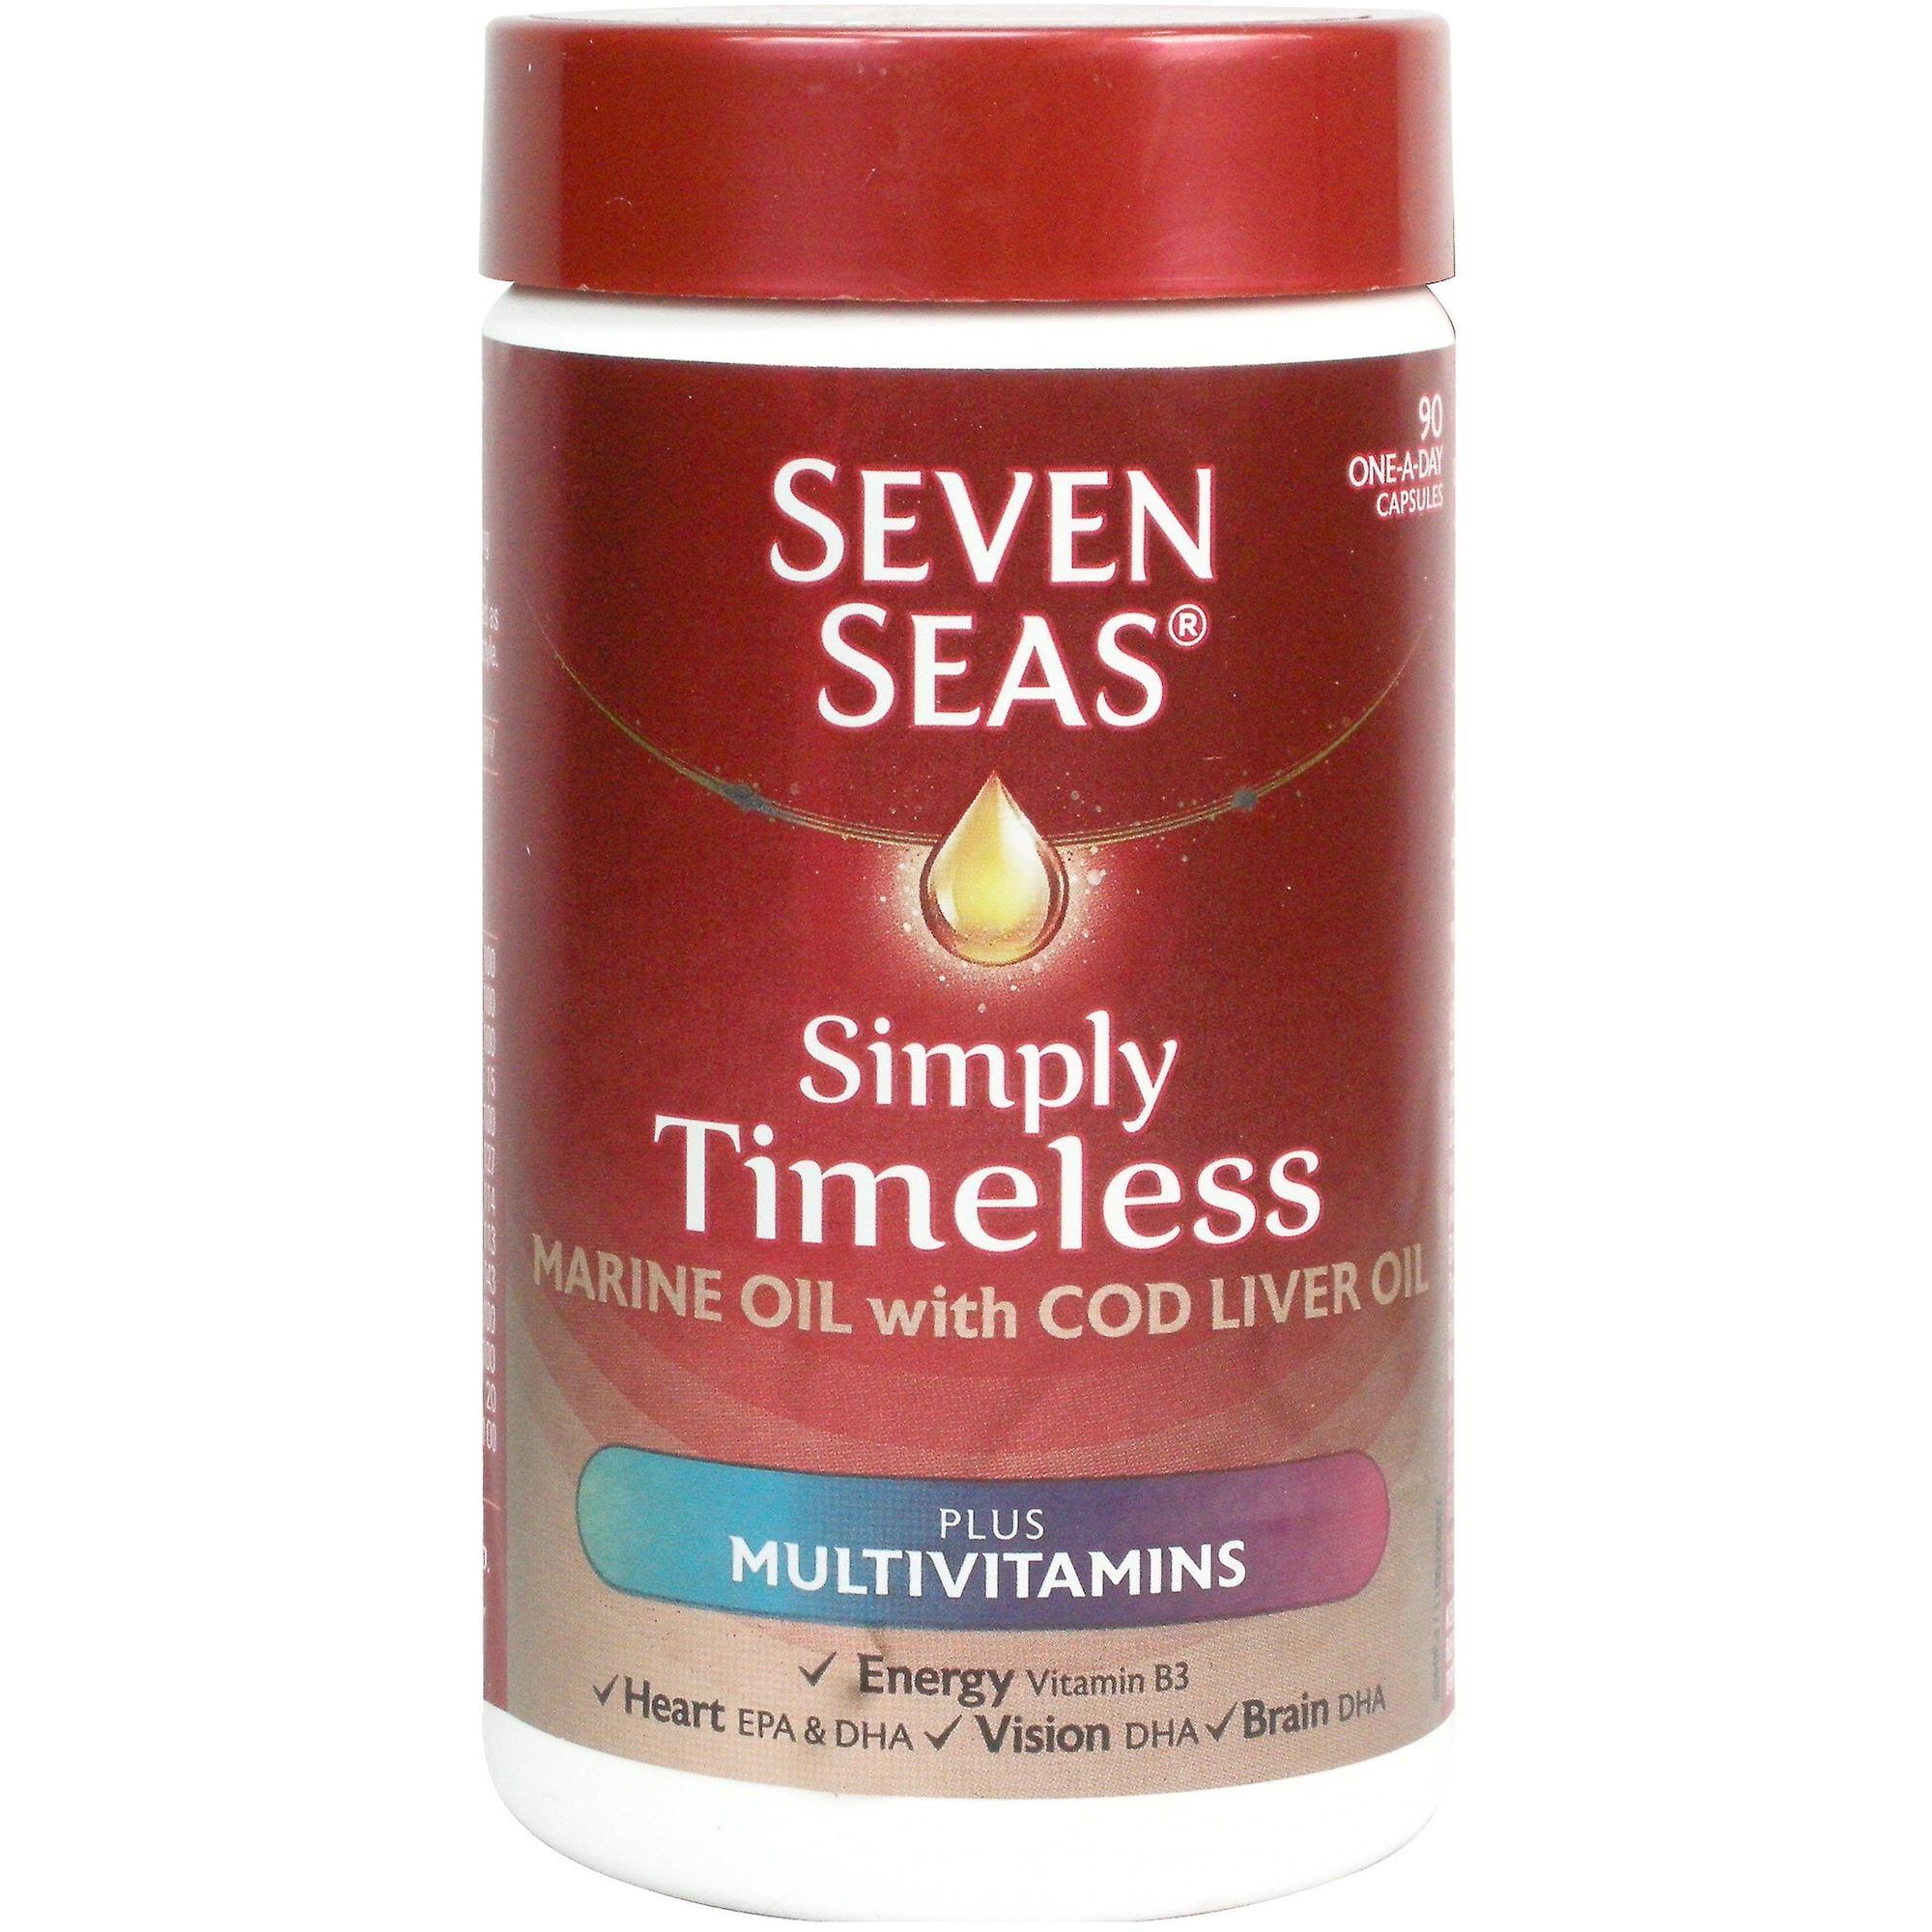 Seven Seas Simply Timeless Omega-3 Supplement - 60 Capsules